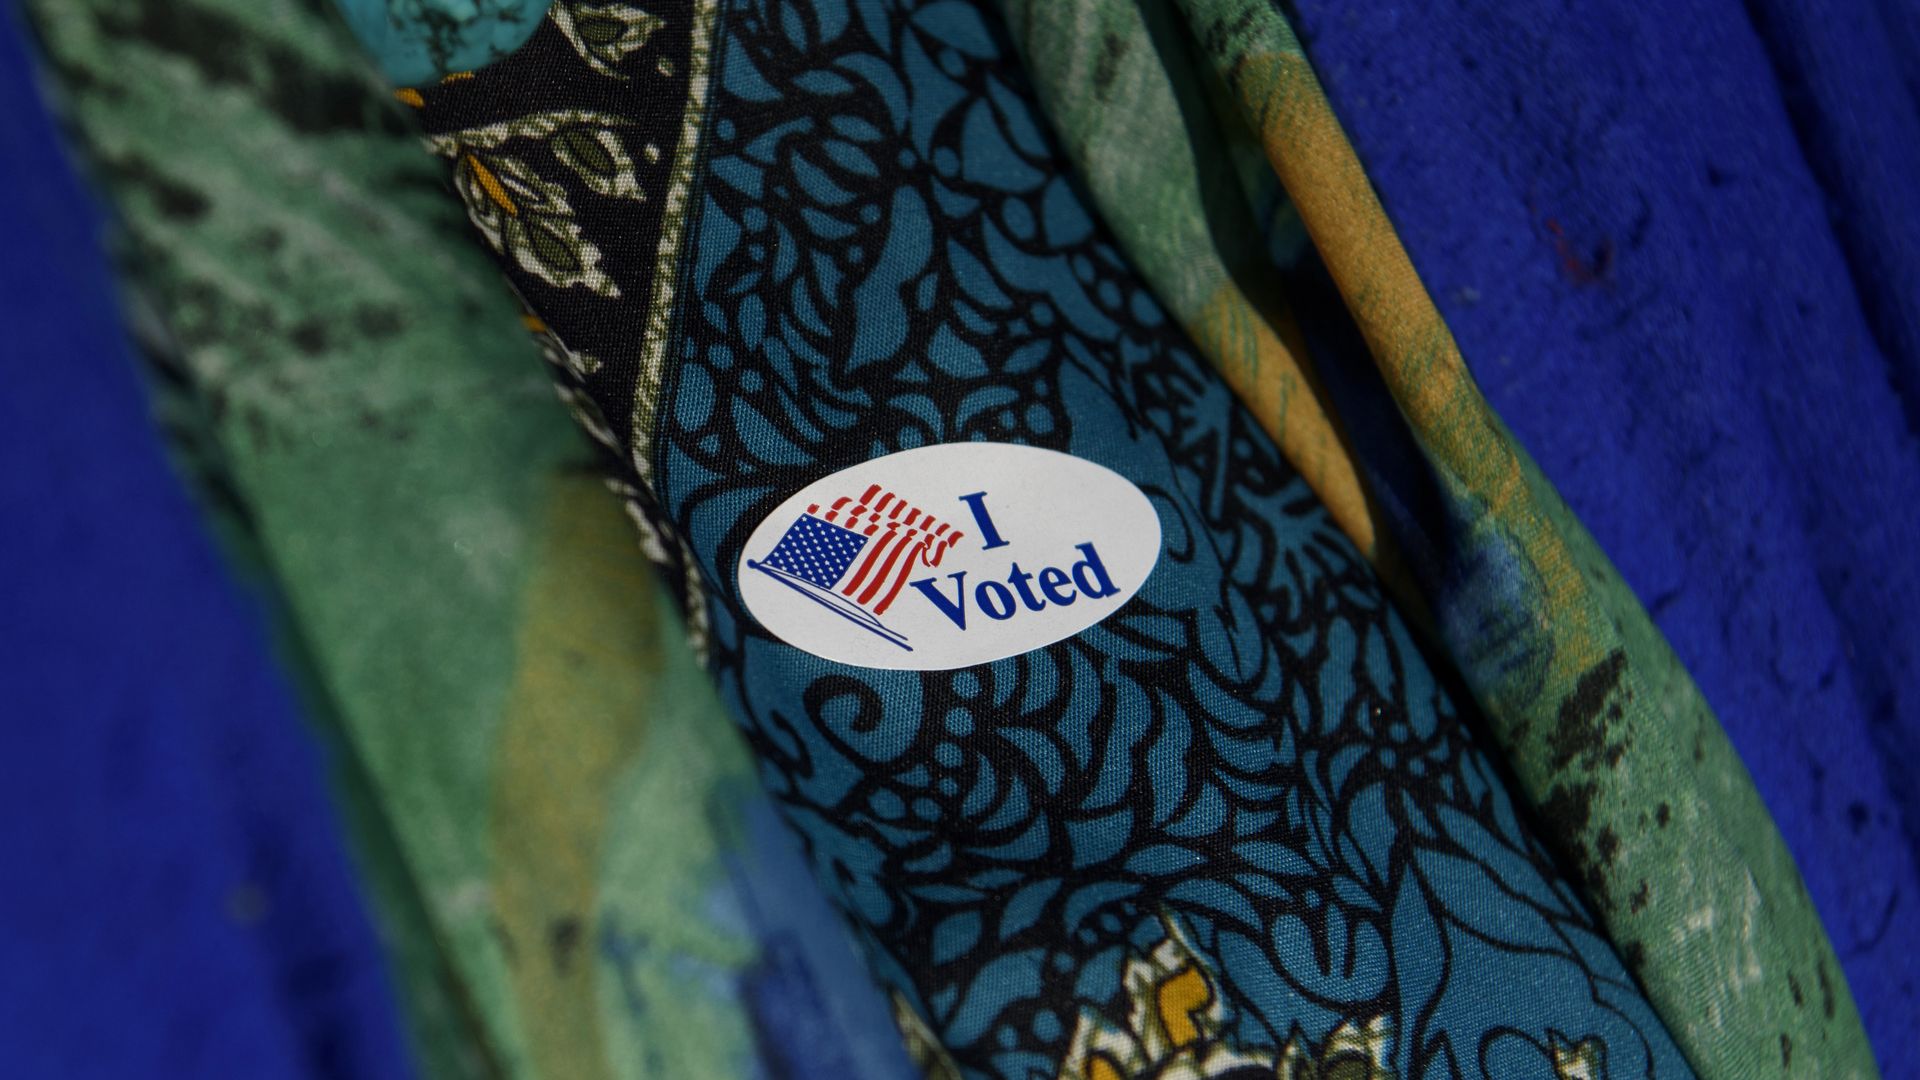 A voter dons an "I Voted" sticker on her blue and green top with gold lace